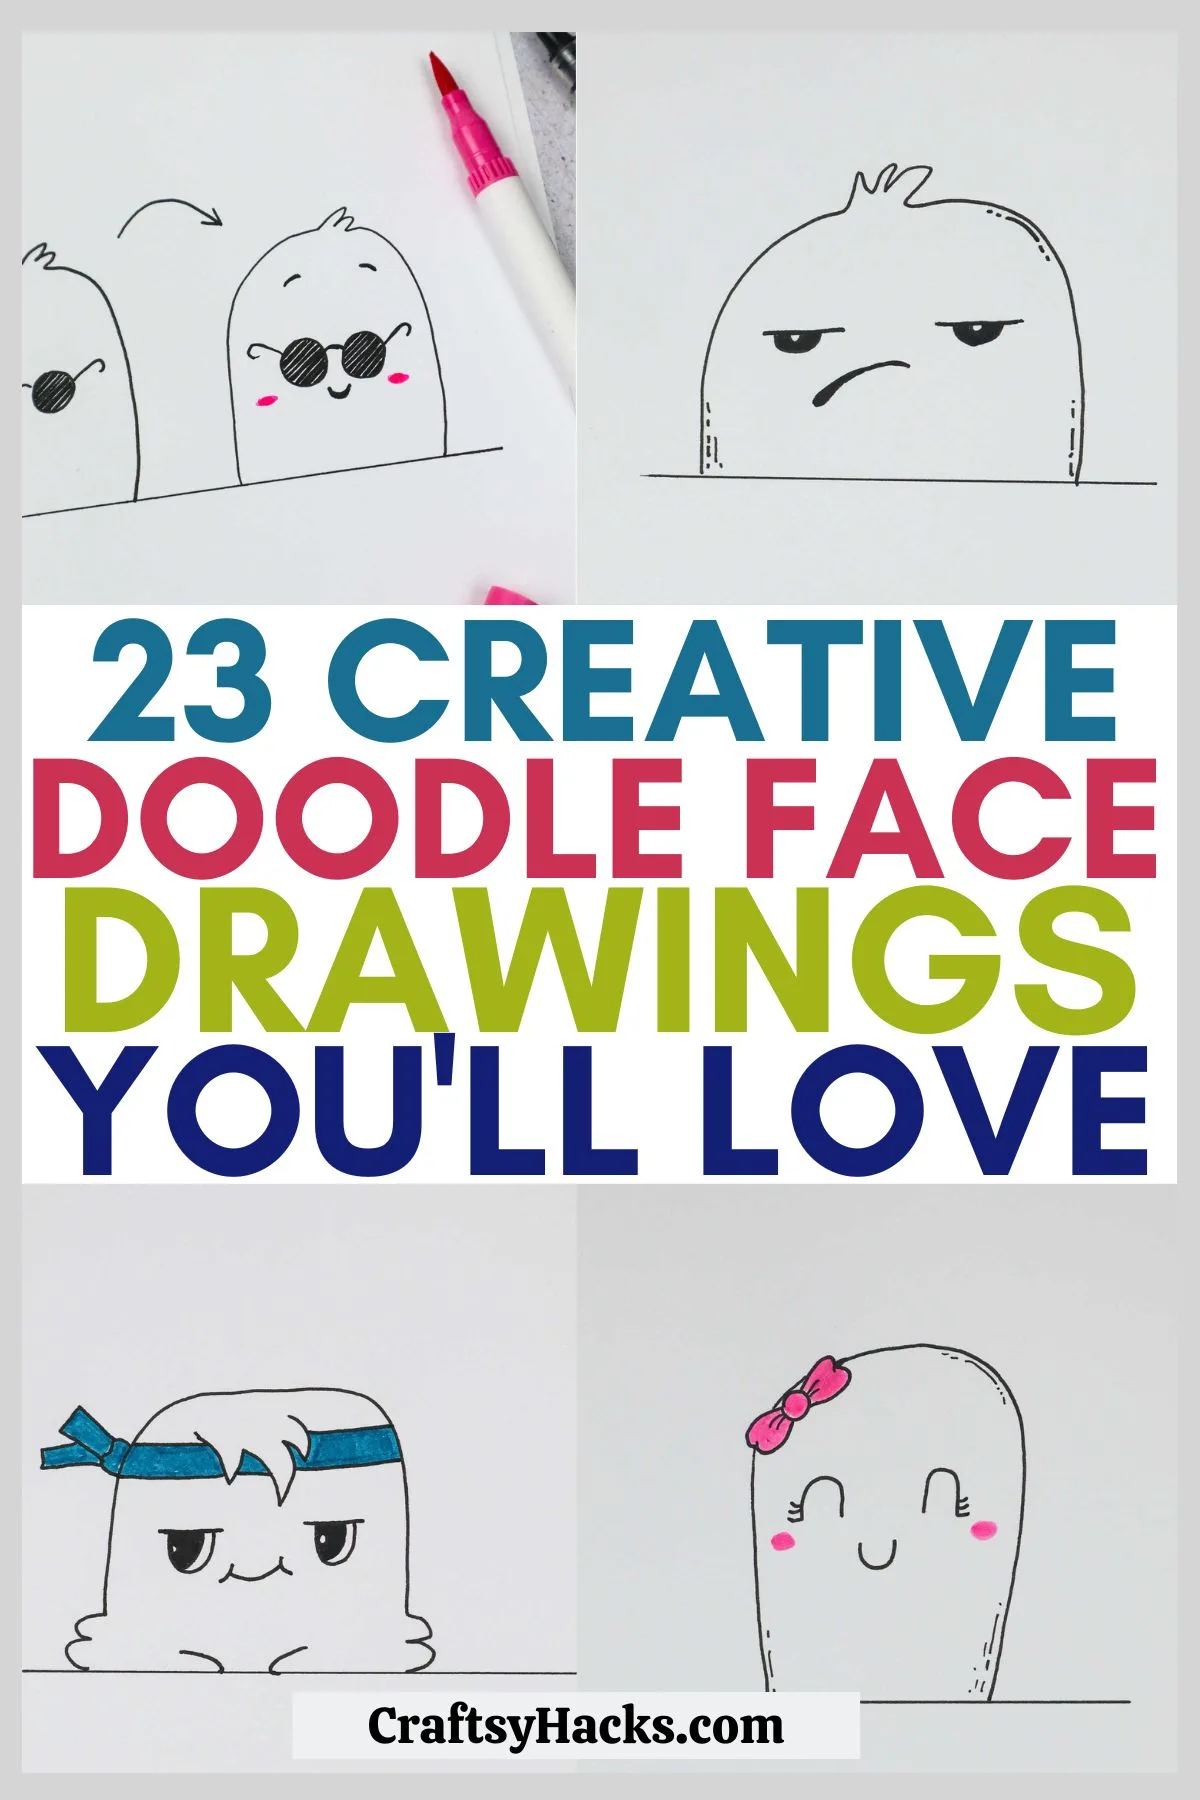 23 Tattoos  Small drawings, Easy doodles drawings, Easy doodle art